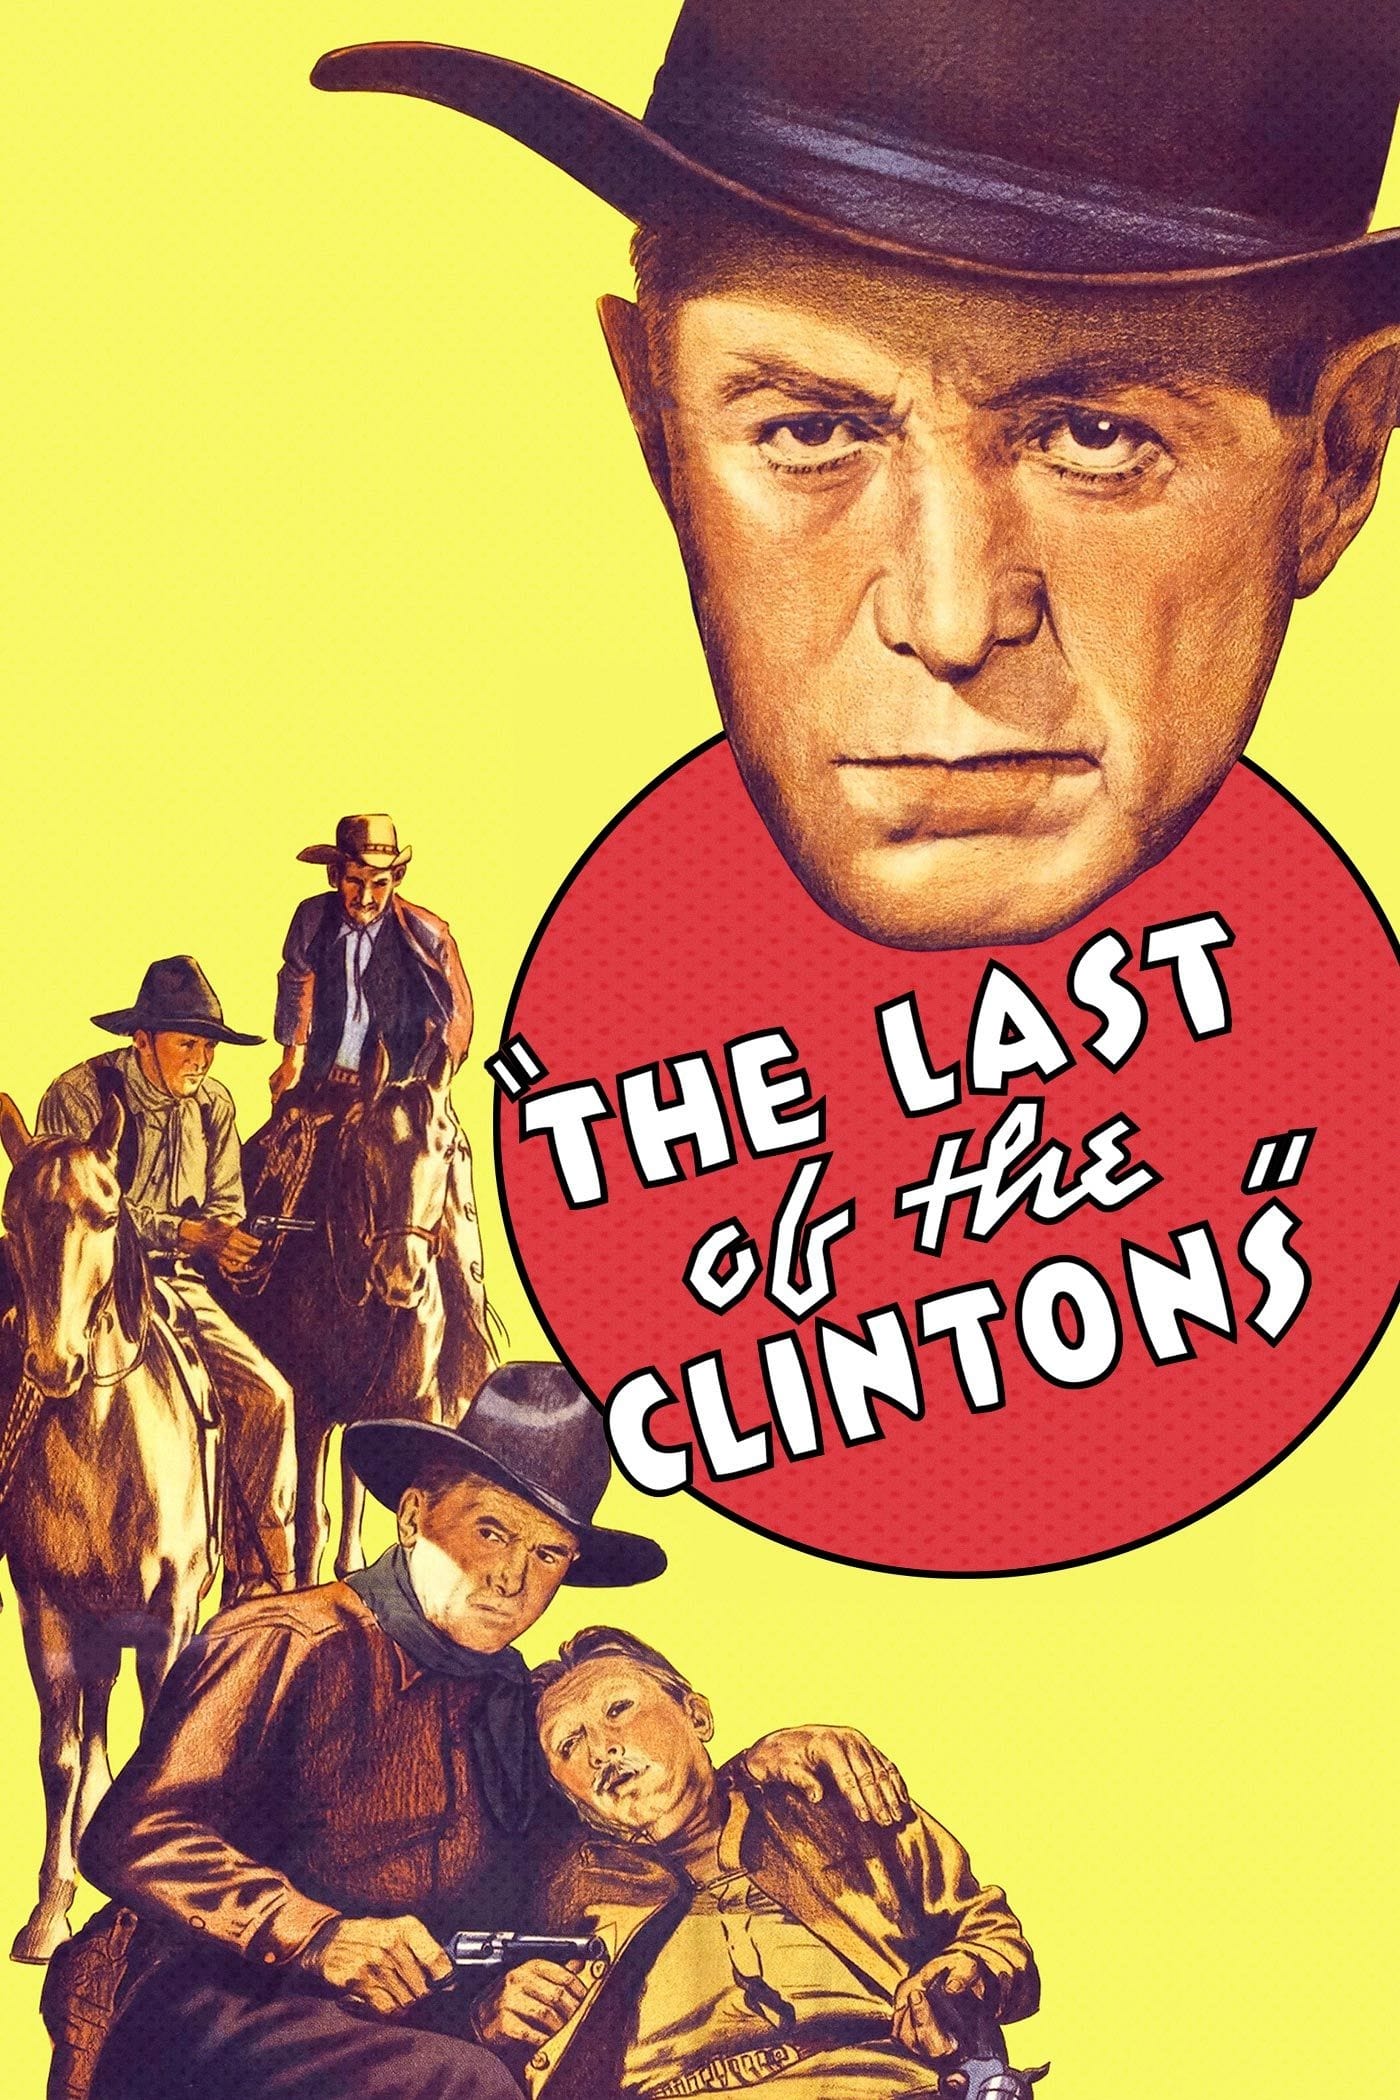 The Last of the Clintons